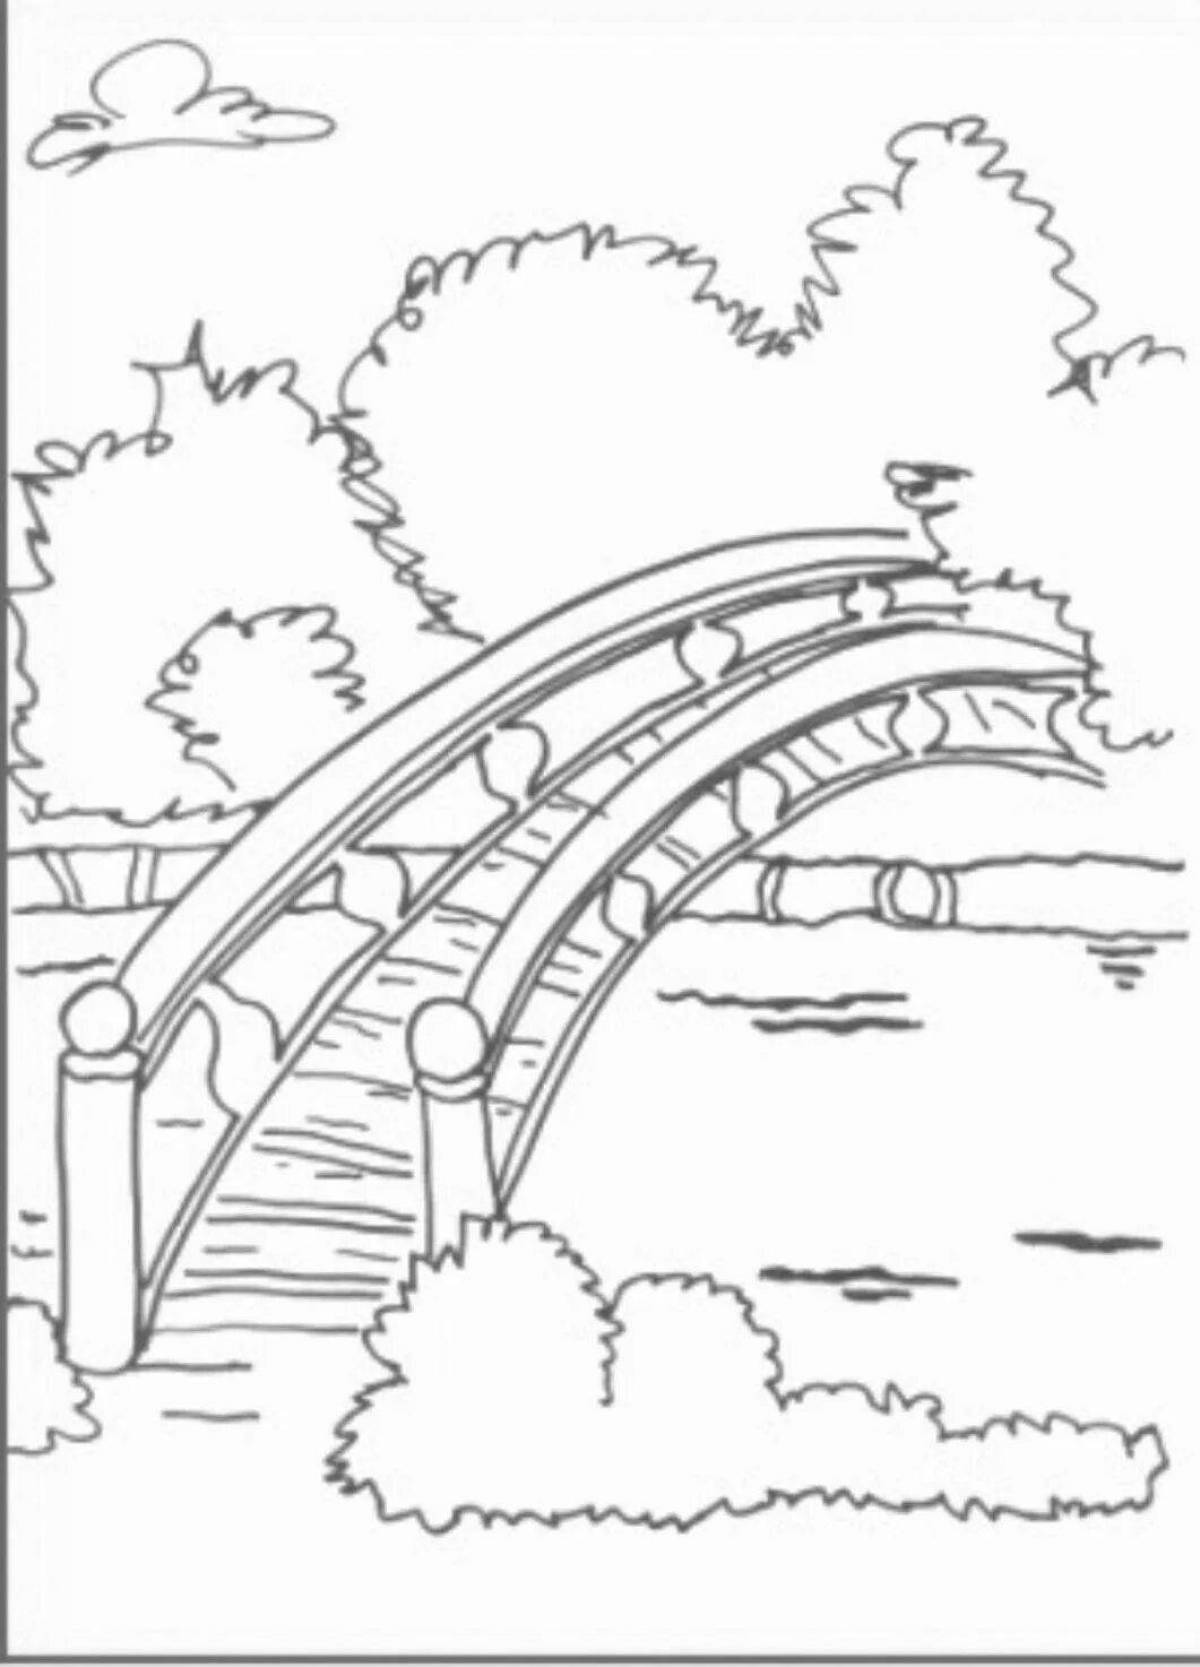 Playful river coloring for kids